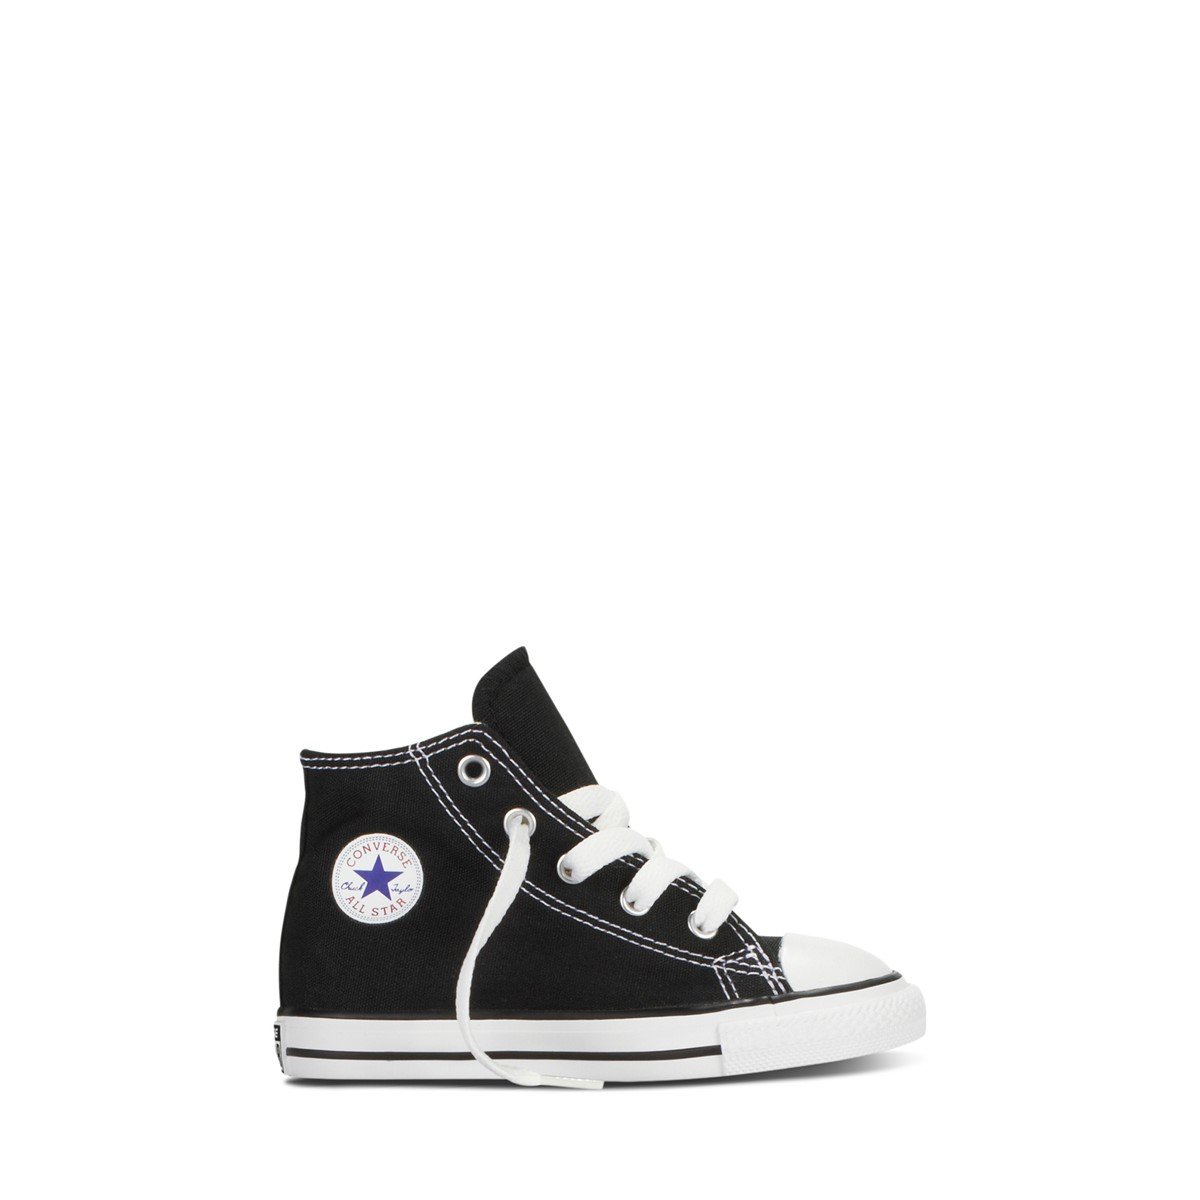 Toddler's Chuck Taylor All Star Hi Sneakers in Black/White | Little Burgundy